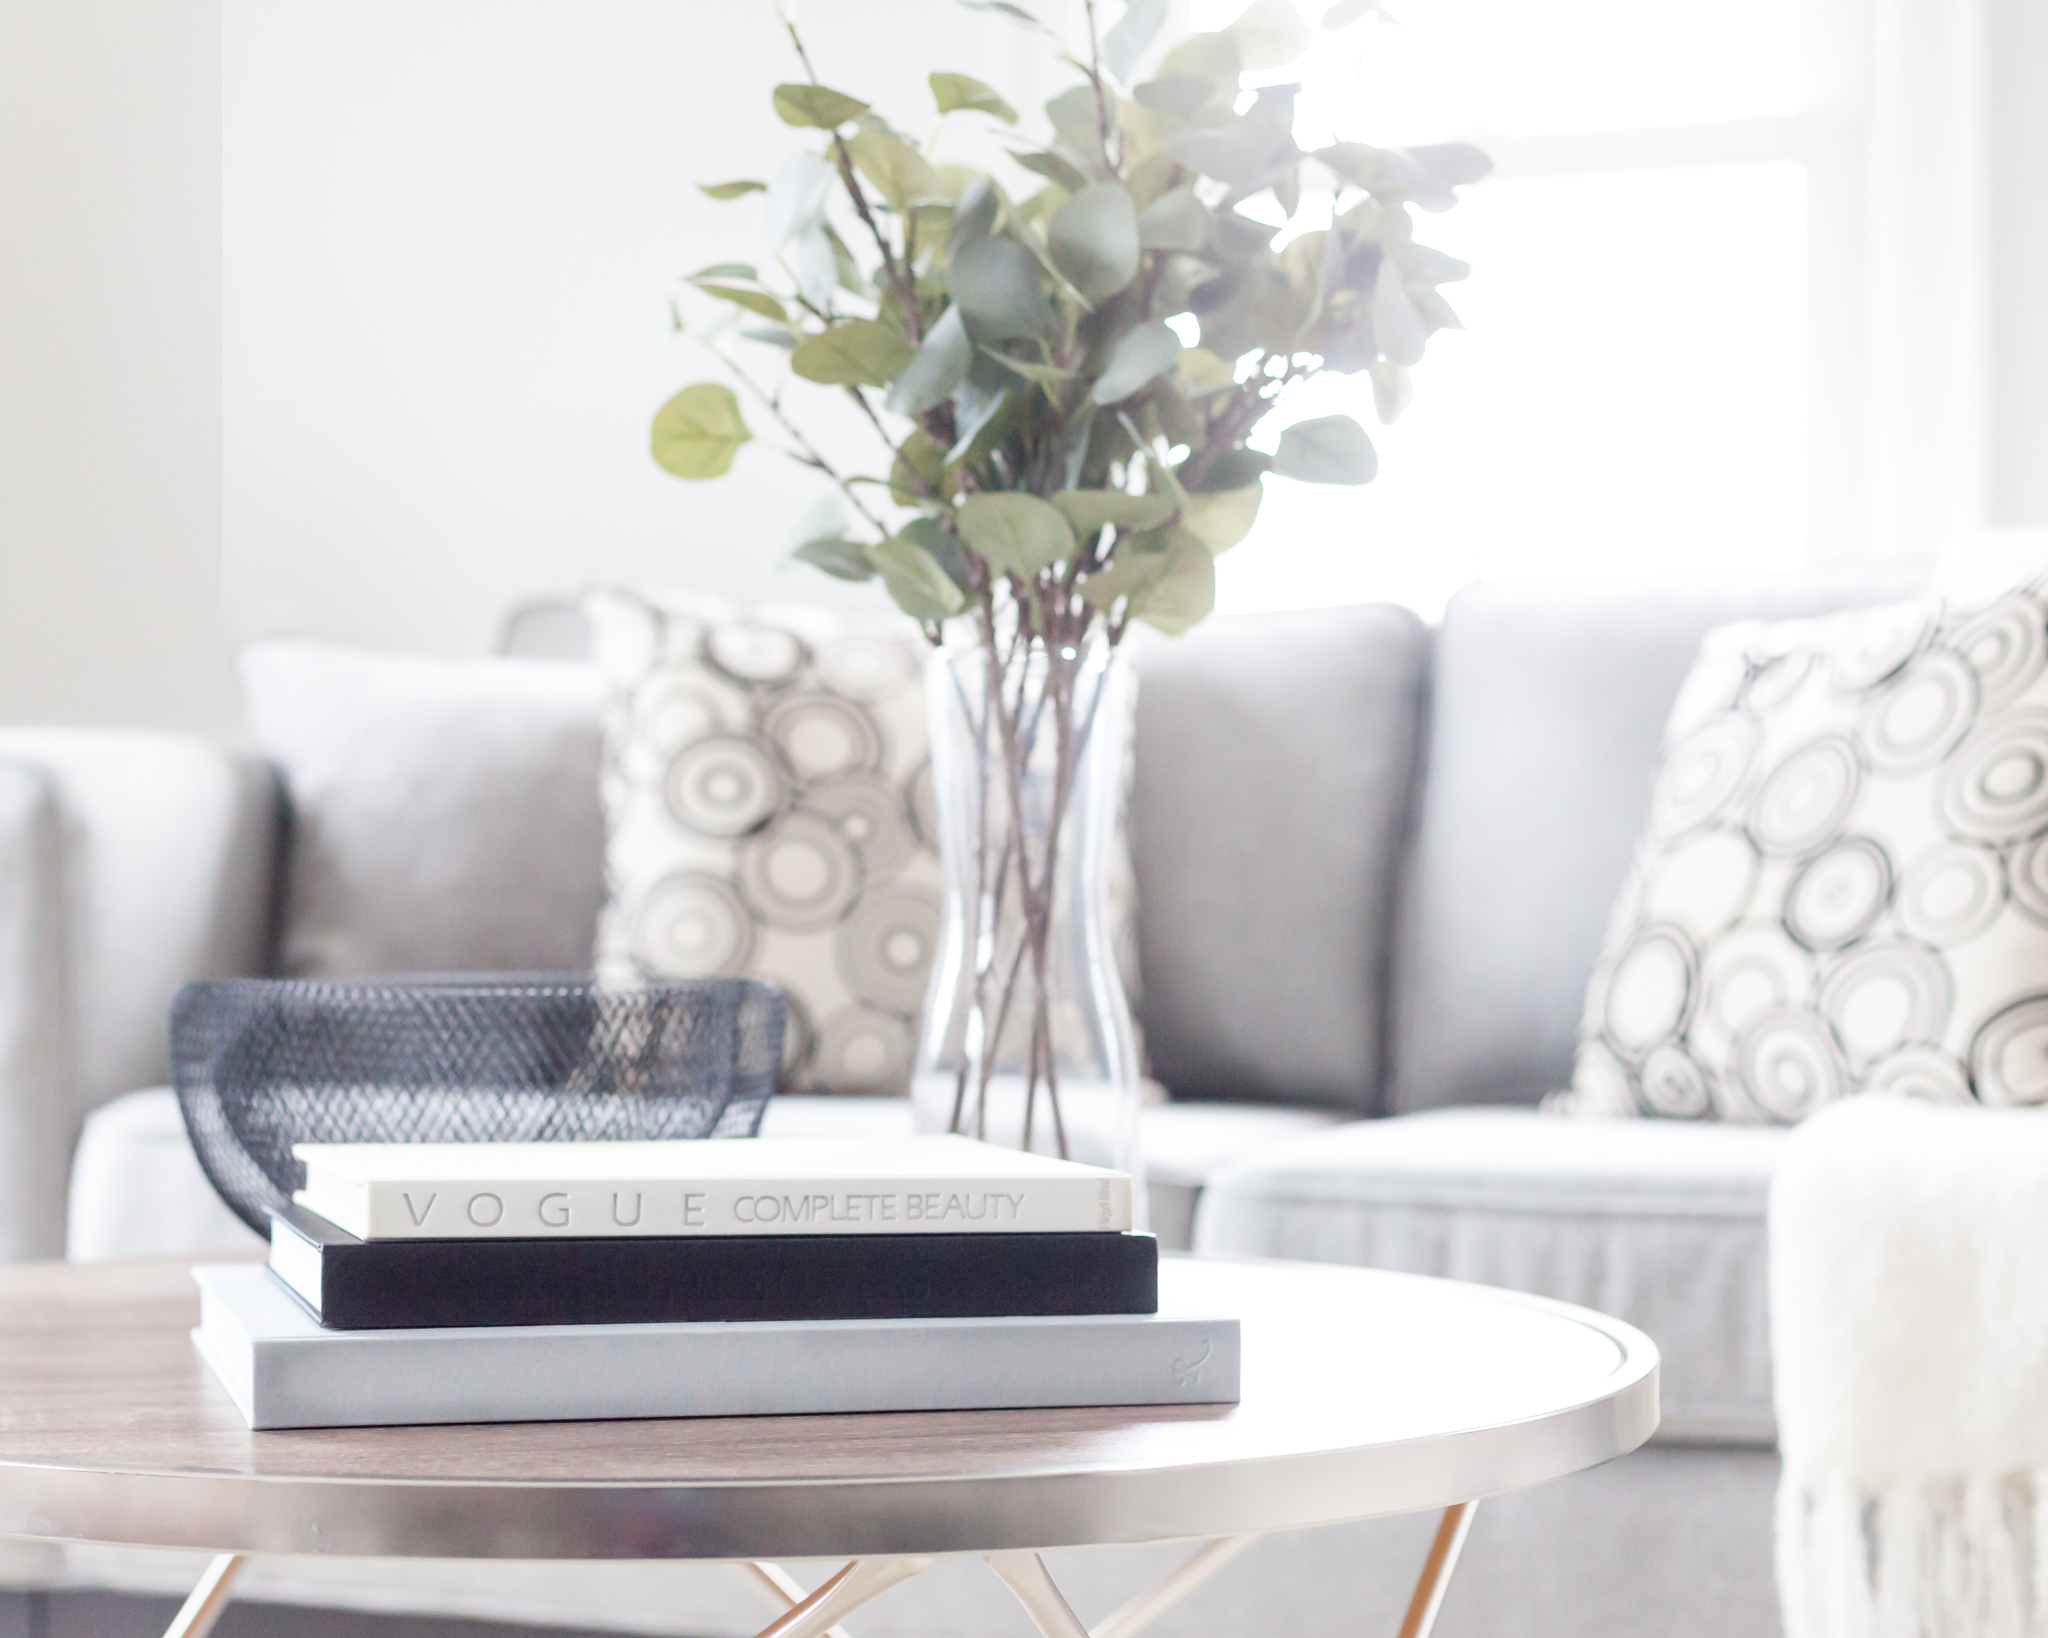 Home Interior Staging in Barrie provided by New Leaf Decor. Coffee table books are great staging props when selling your home.